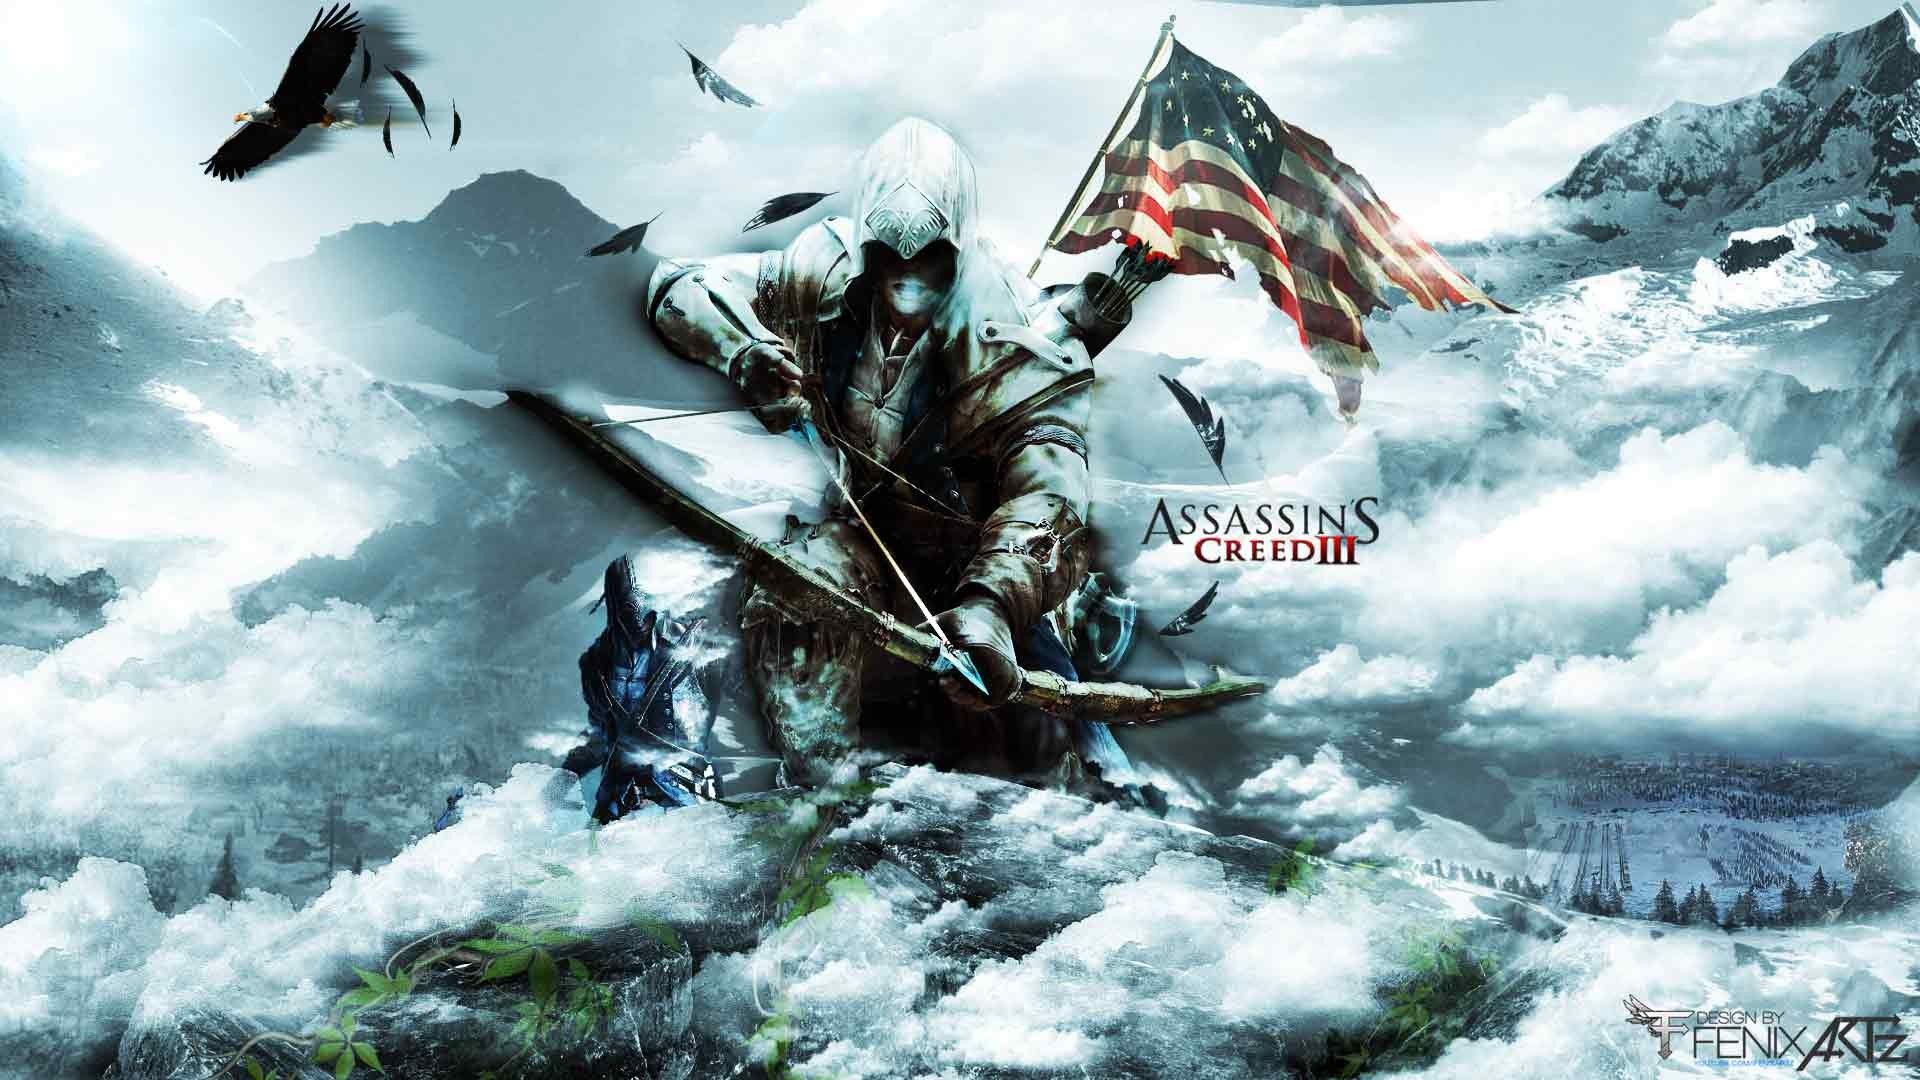 Awesome Assassin's Creed 3 Wallpaper Free Awesome Assassin's Creed 3 Background